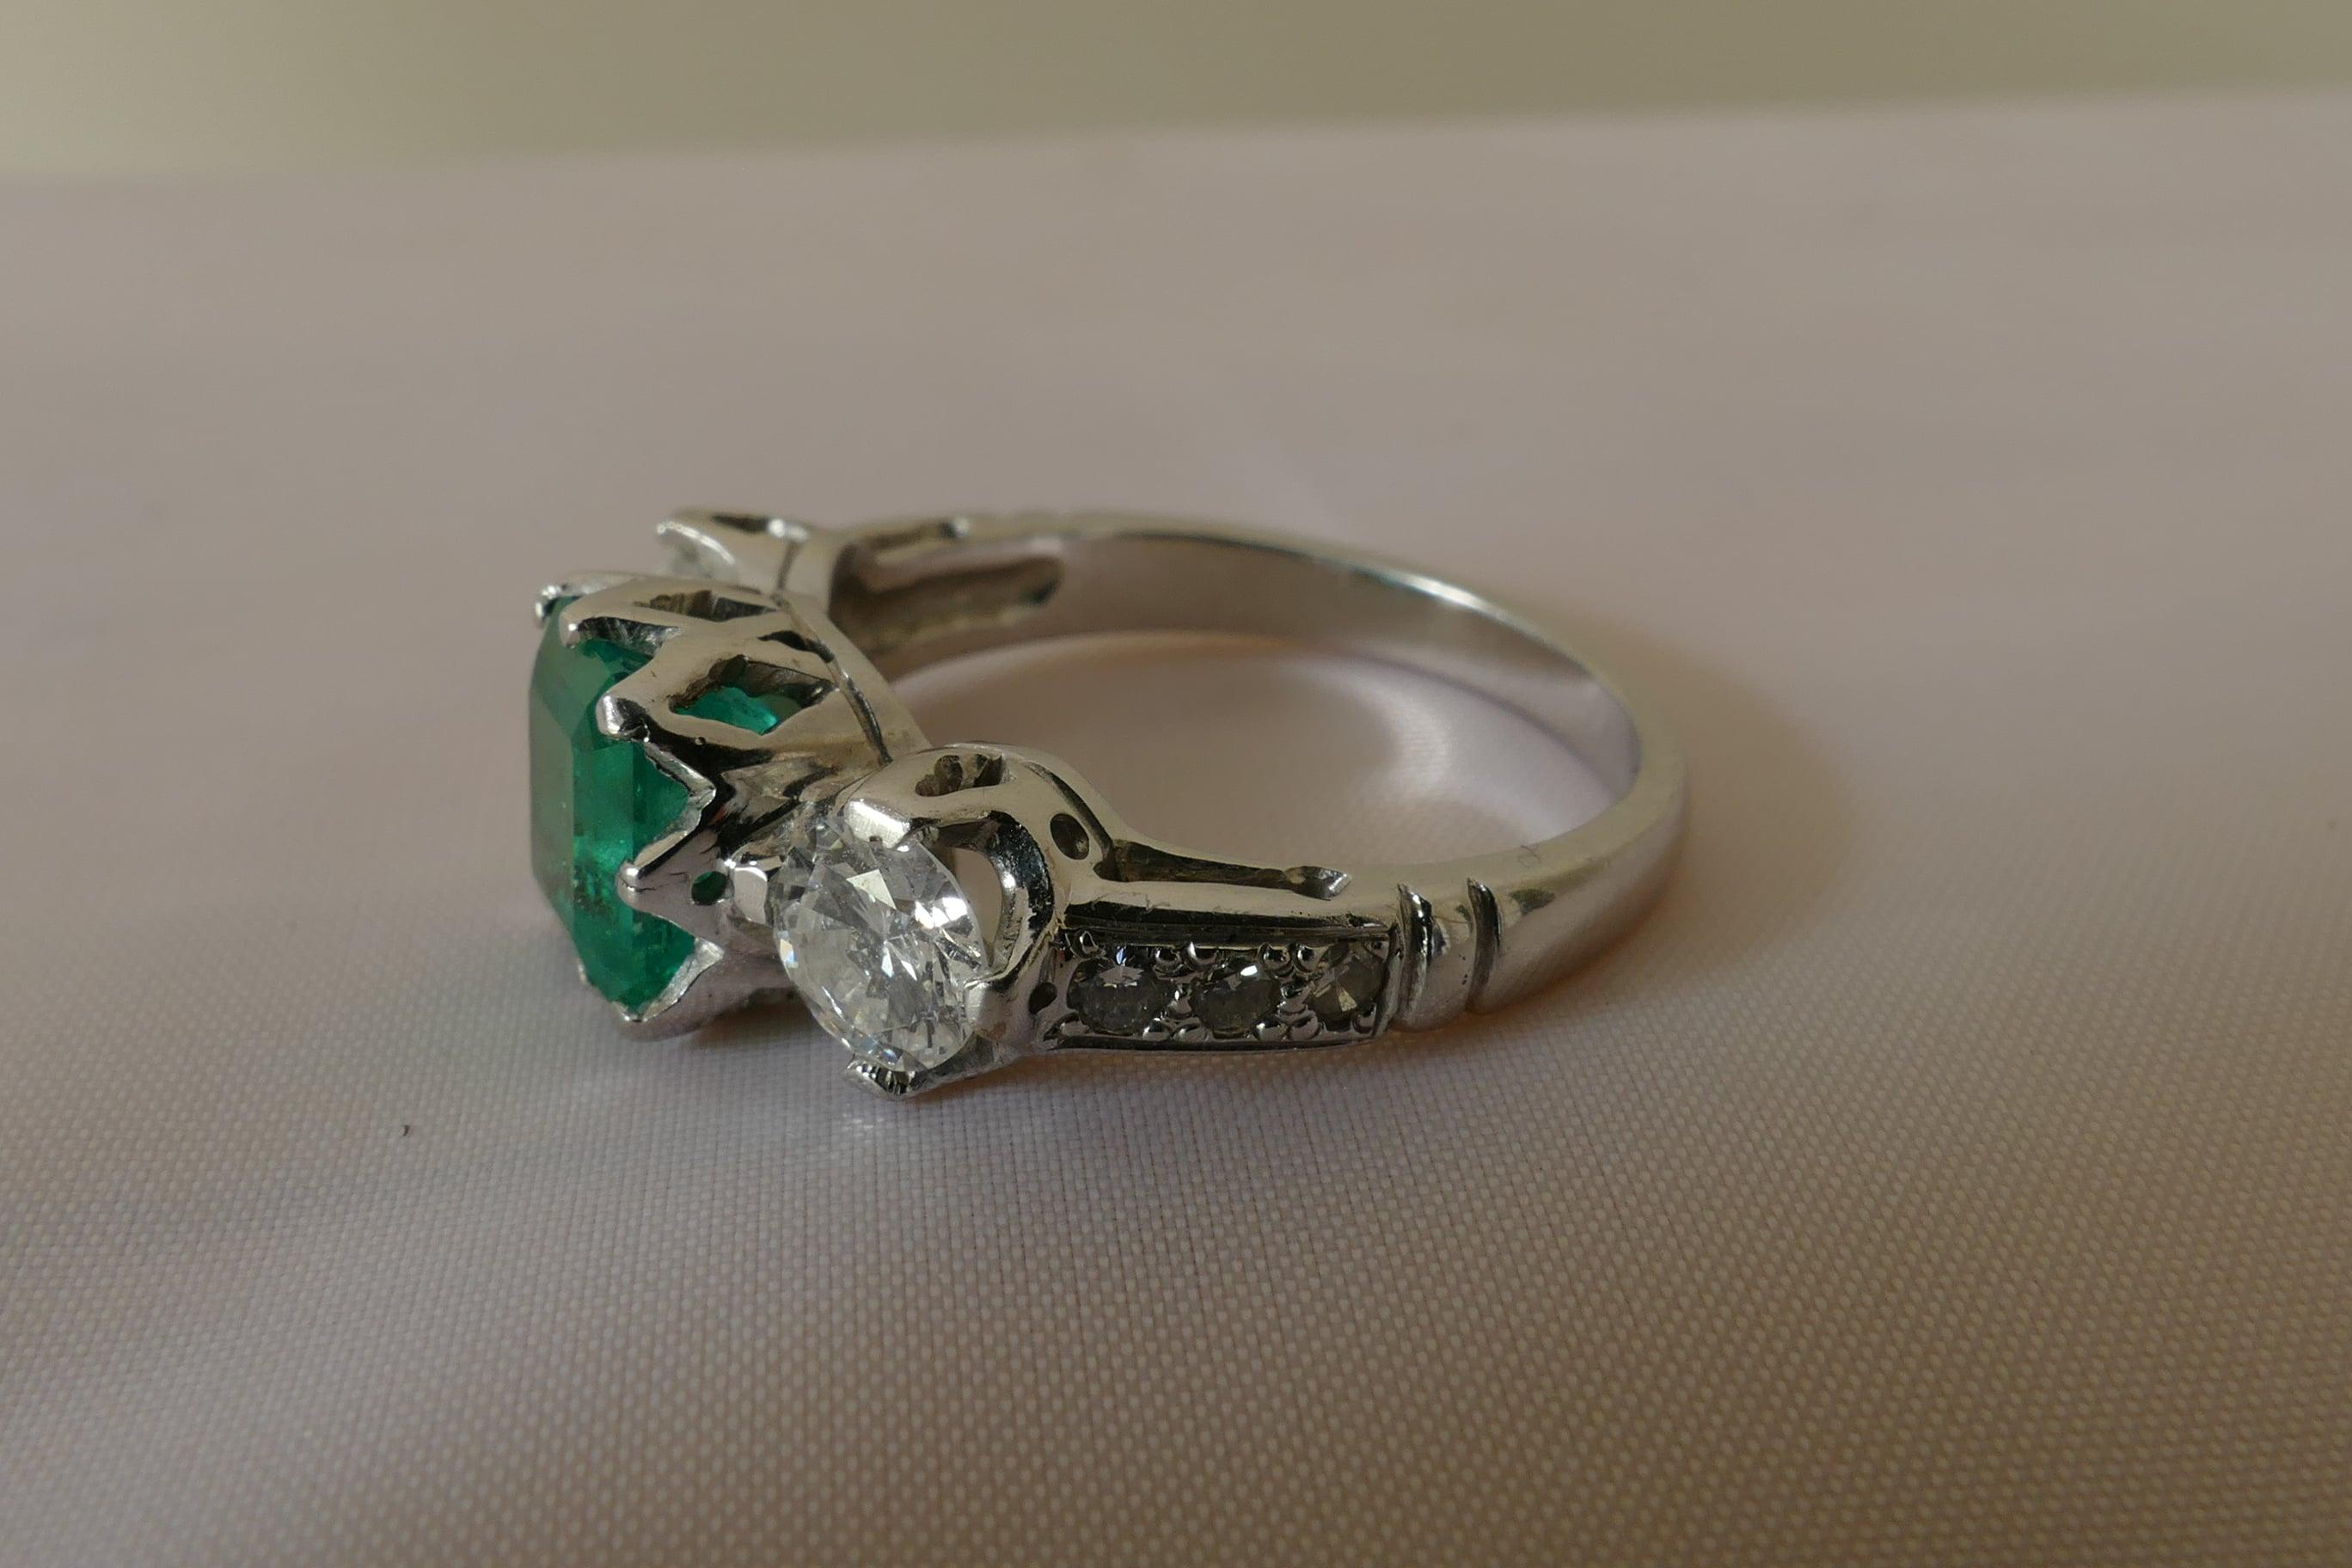 This Ring features a high quality Emerald Cut Emerald, 8 claw set of 2 carats.
Fine vivid green colour with 2 Round Brilliant Cut Diamonds of approximately 0.8 Carat in weight H Colour as the surround.
AS well there are 6 Round Cut Diamonds SI